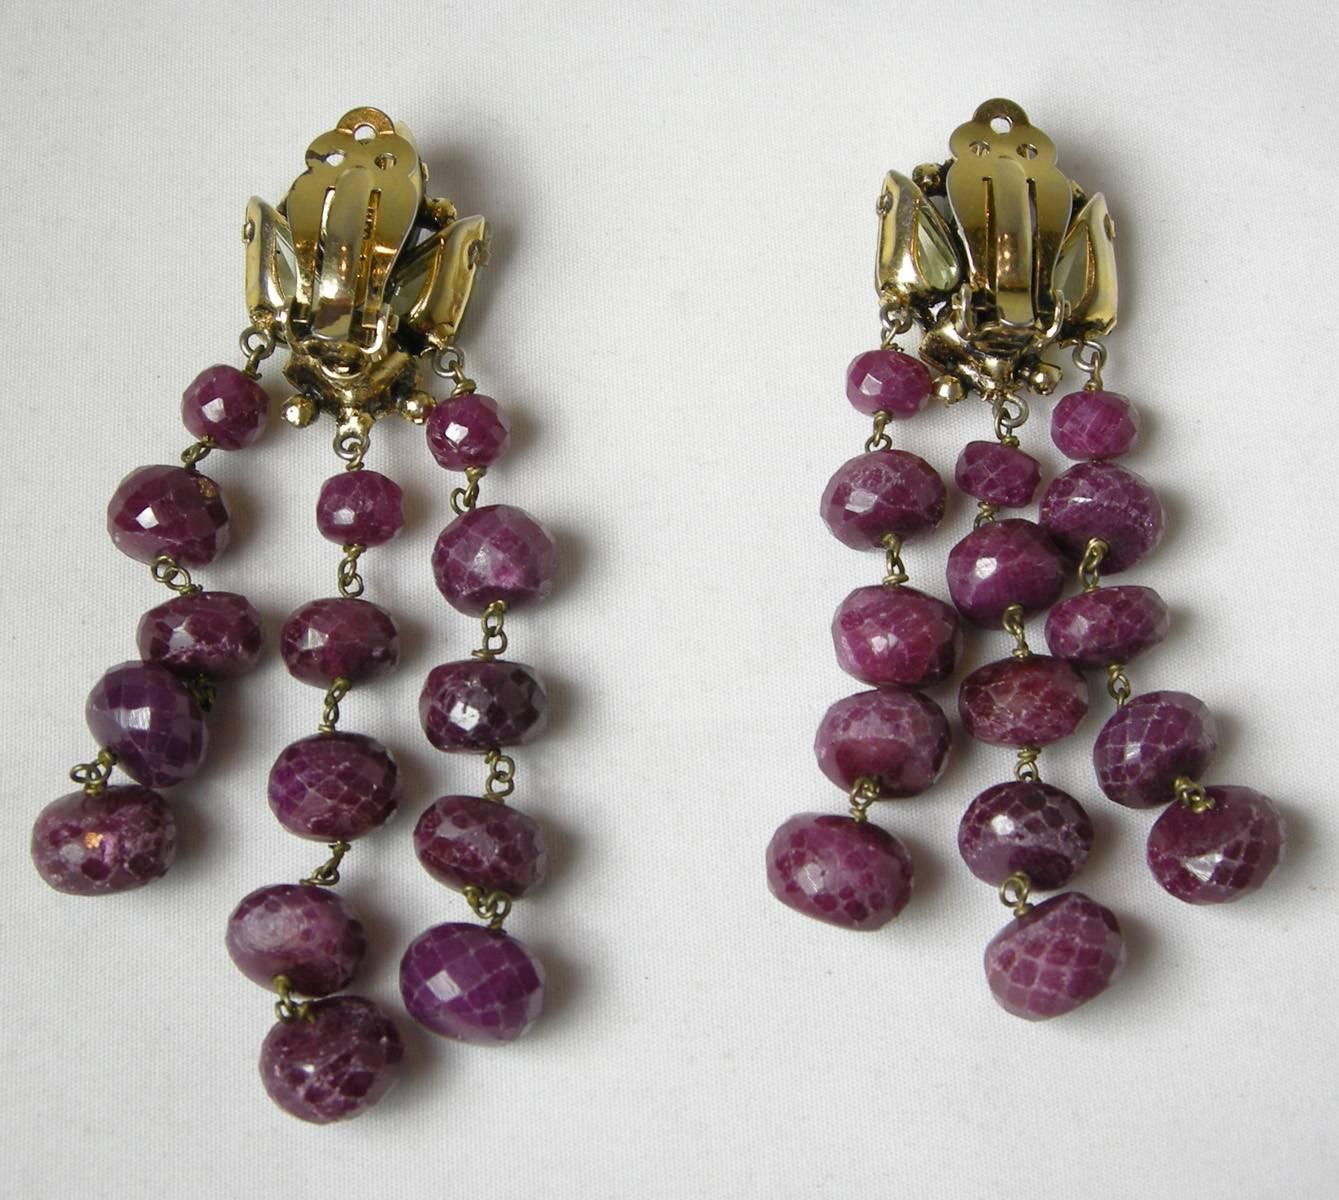 These vintage Iradj Moini gemstone earrings are gorgeous.  The top of these clip earrings have pronged set peridot, amethyst and citrine gemstones accented with tiny crystals.  Dangling down are 3 rows of ruby stones.  They are made with a gold tone